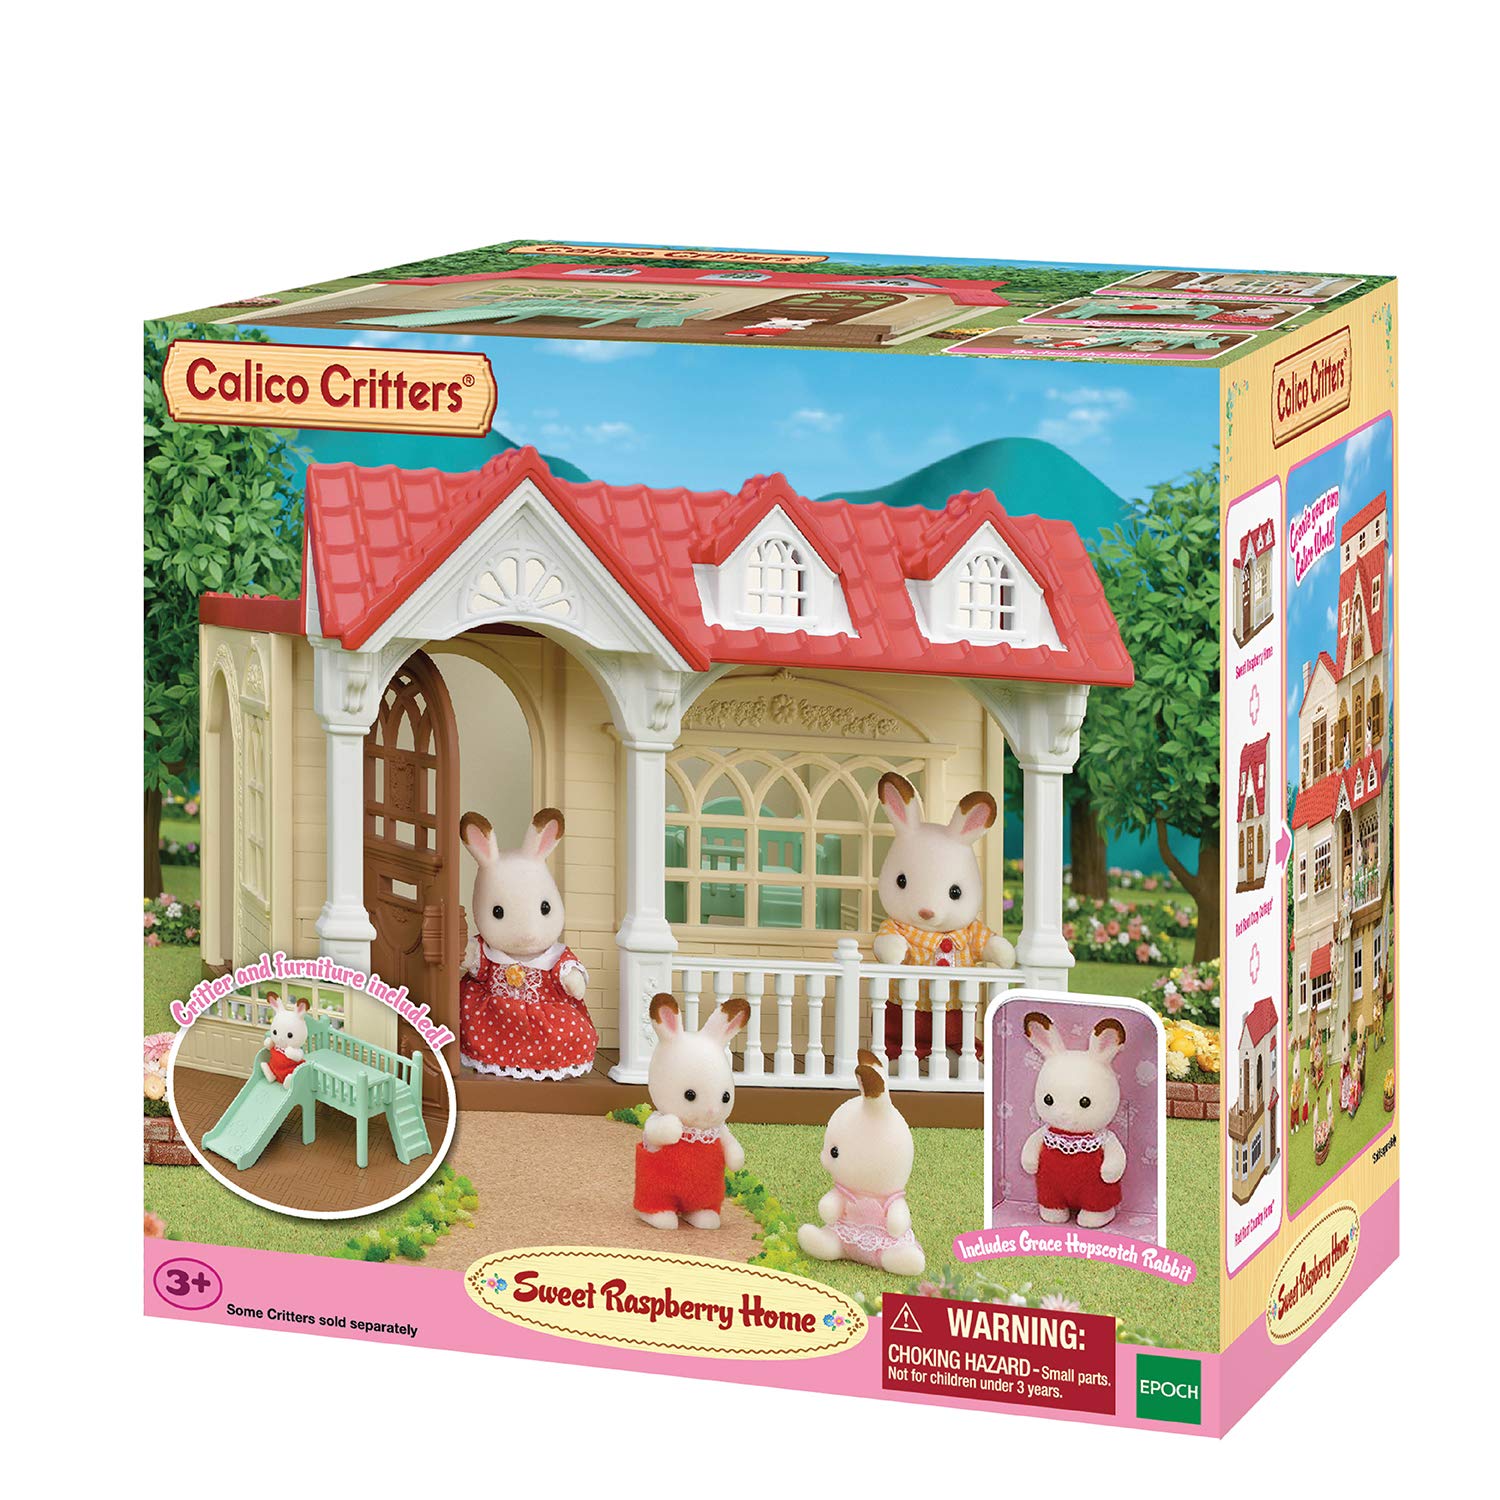 Calico Critters Sweet Raspberry Home Dollhouse Playset with Figure & Furniture Included